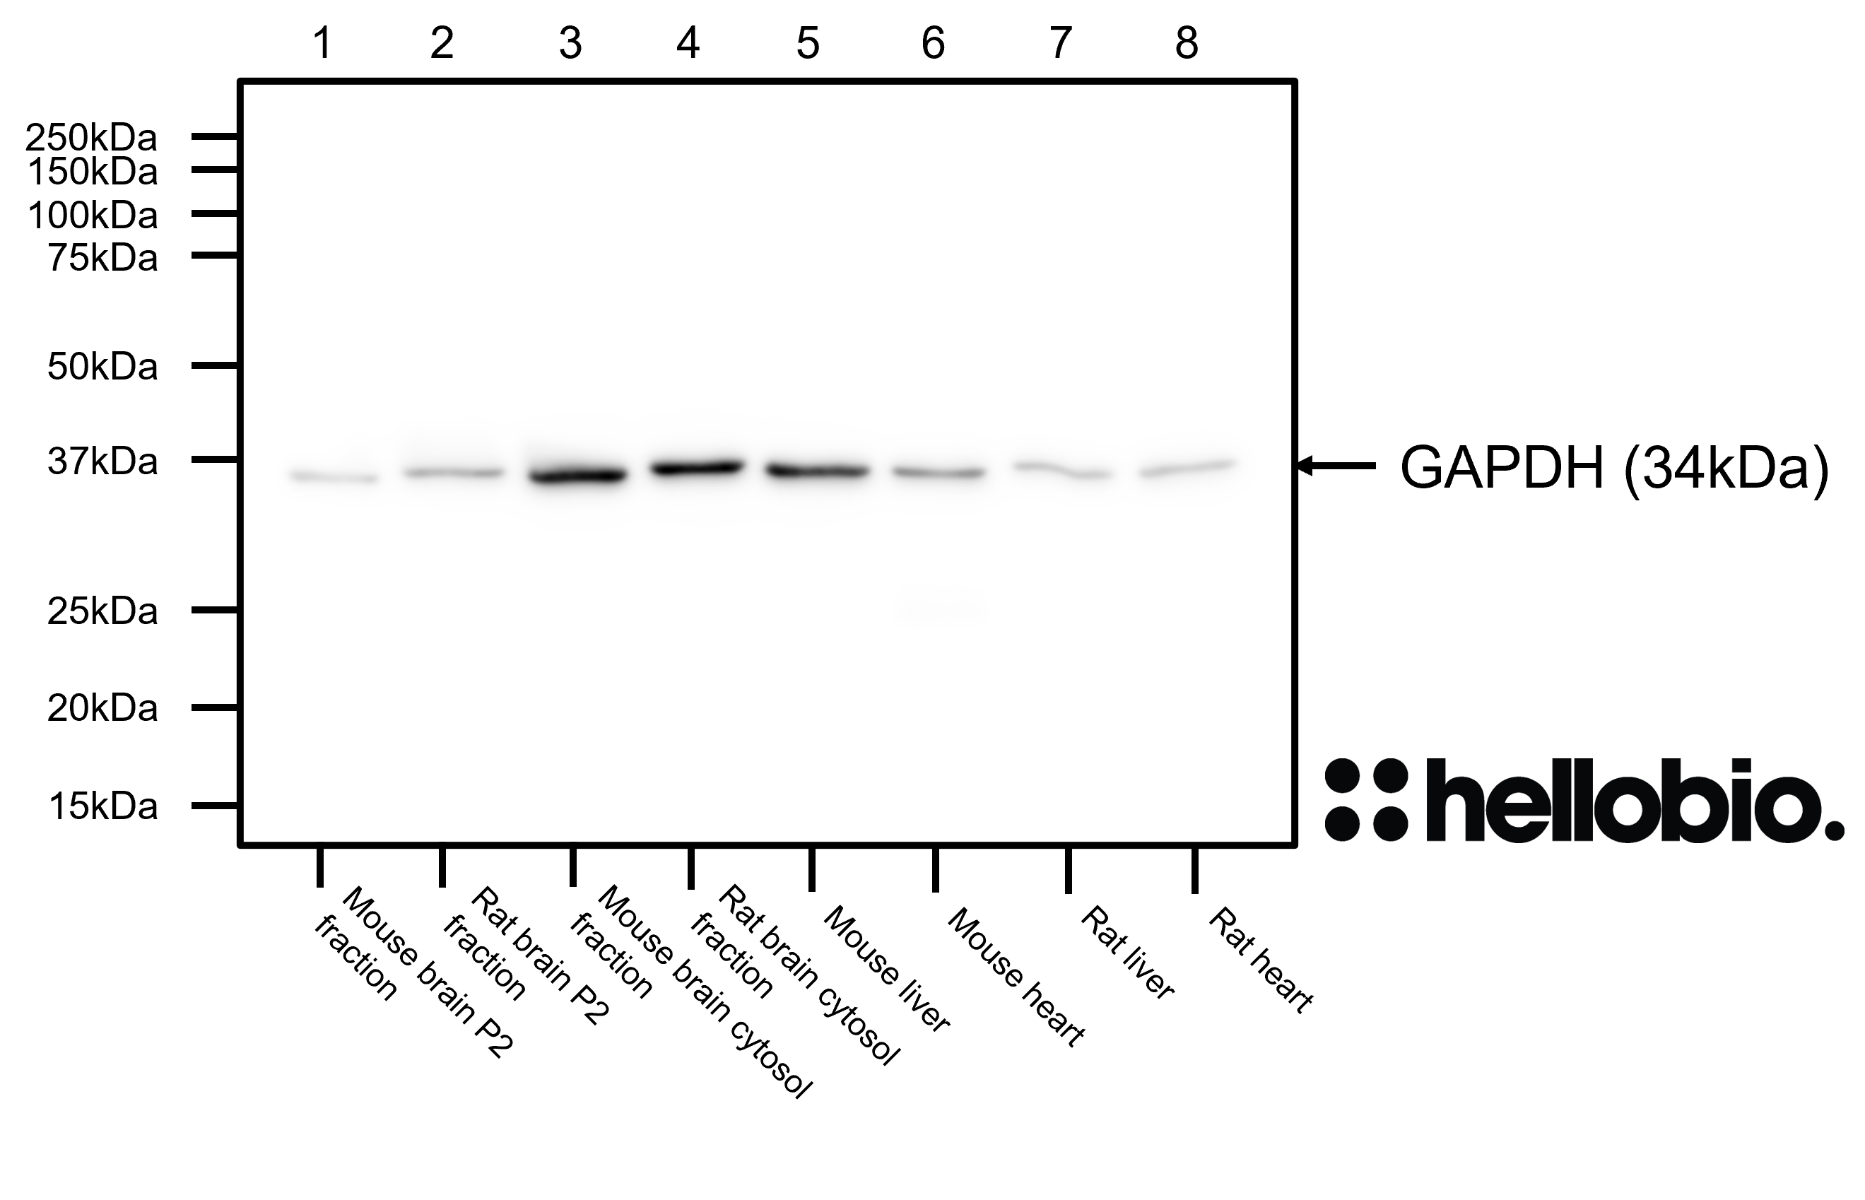 Figure 5. GAPDH expression in various tissue lysates and preparations. 